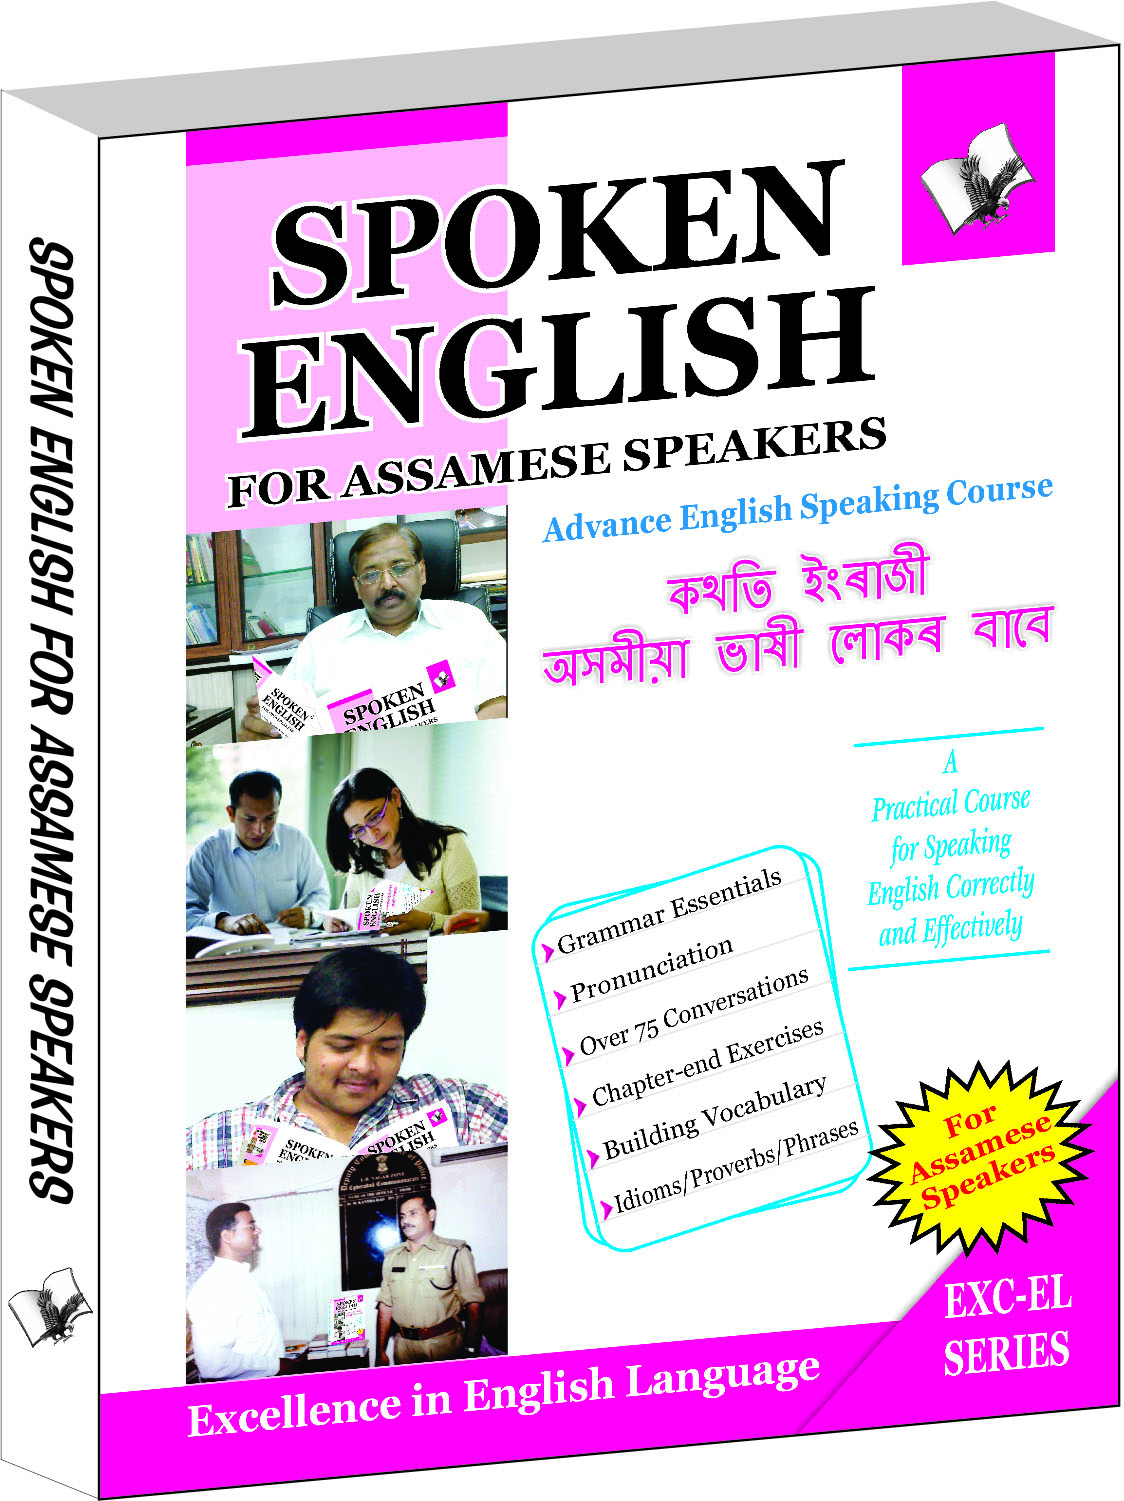 Spoken English For Assamese Speakers-How to convey your ideas in English at home, market & business for Assamese speakers